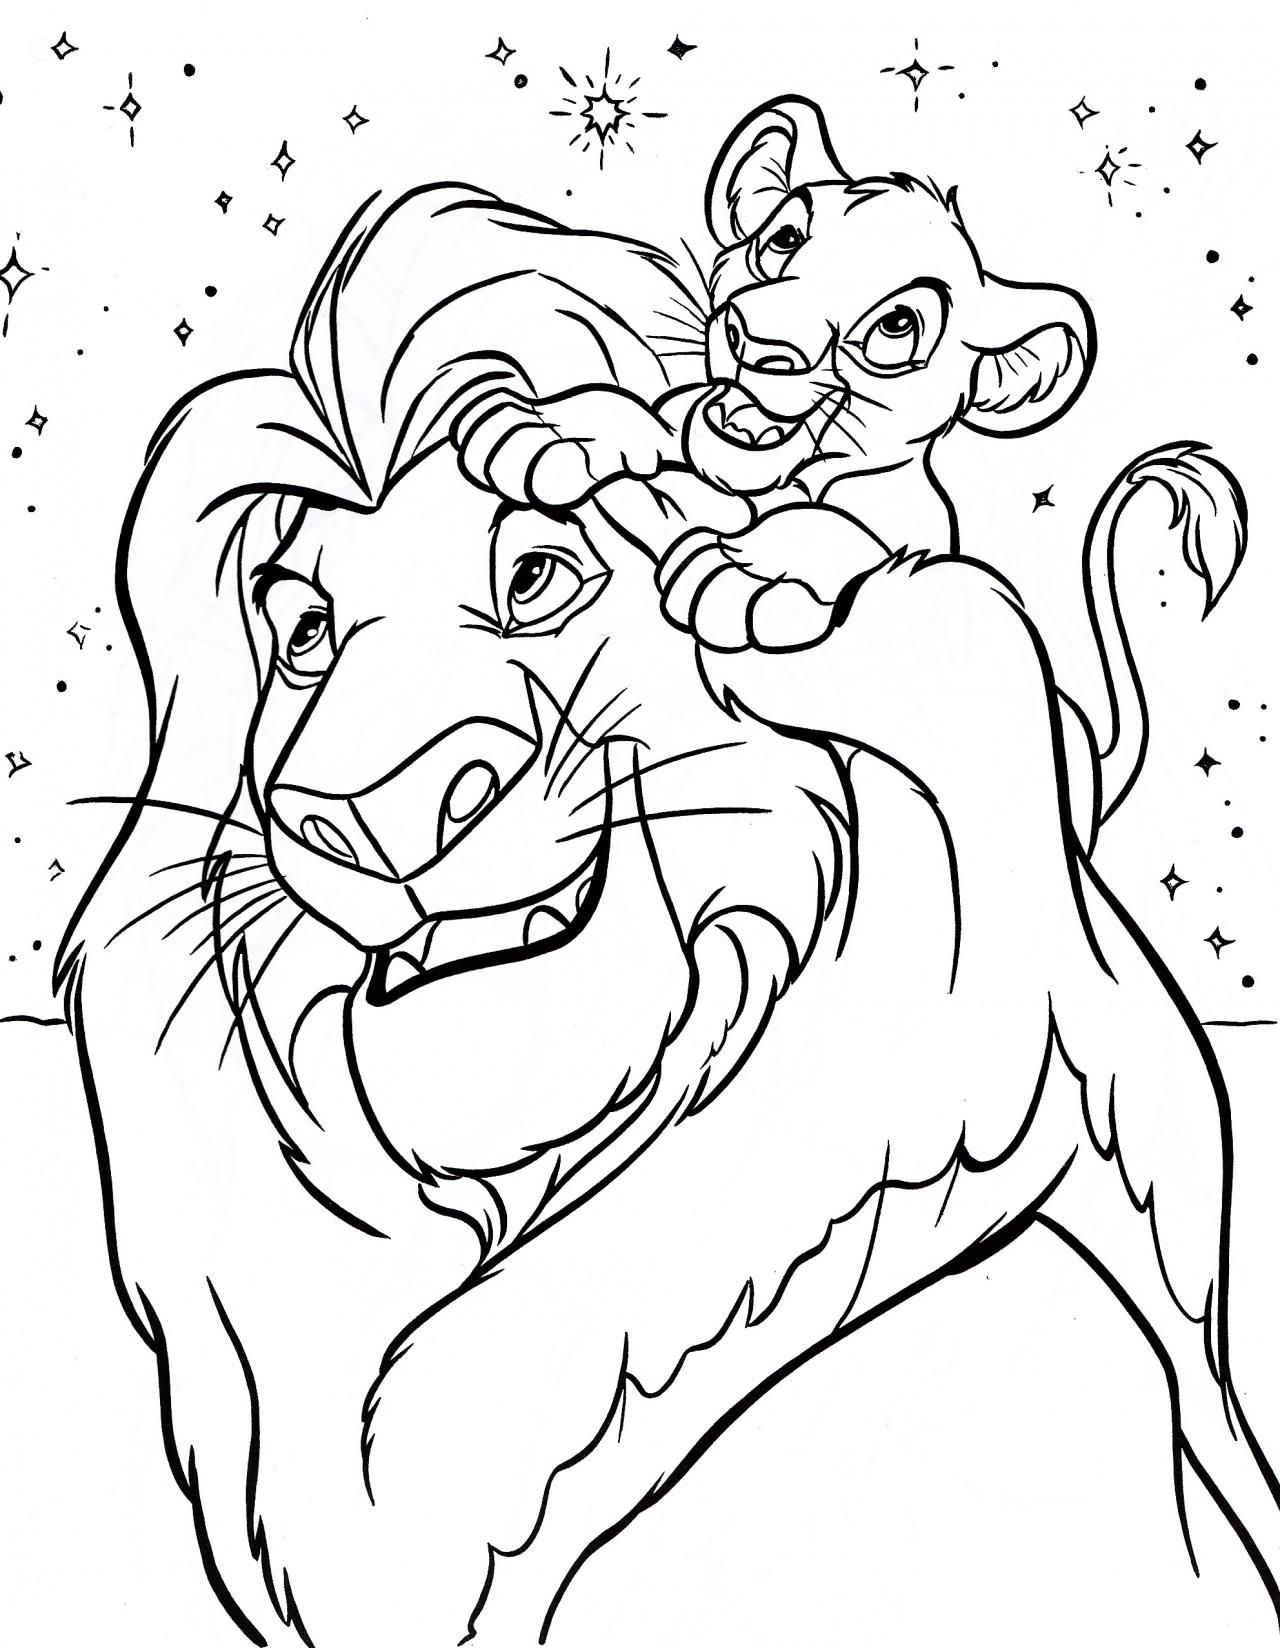 S Disney - Coloring Pages for Kids and for Adults